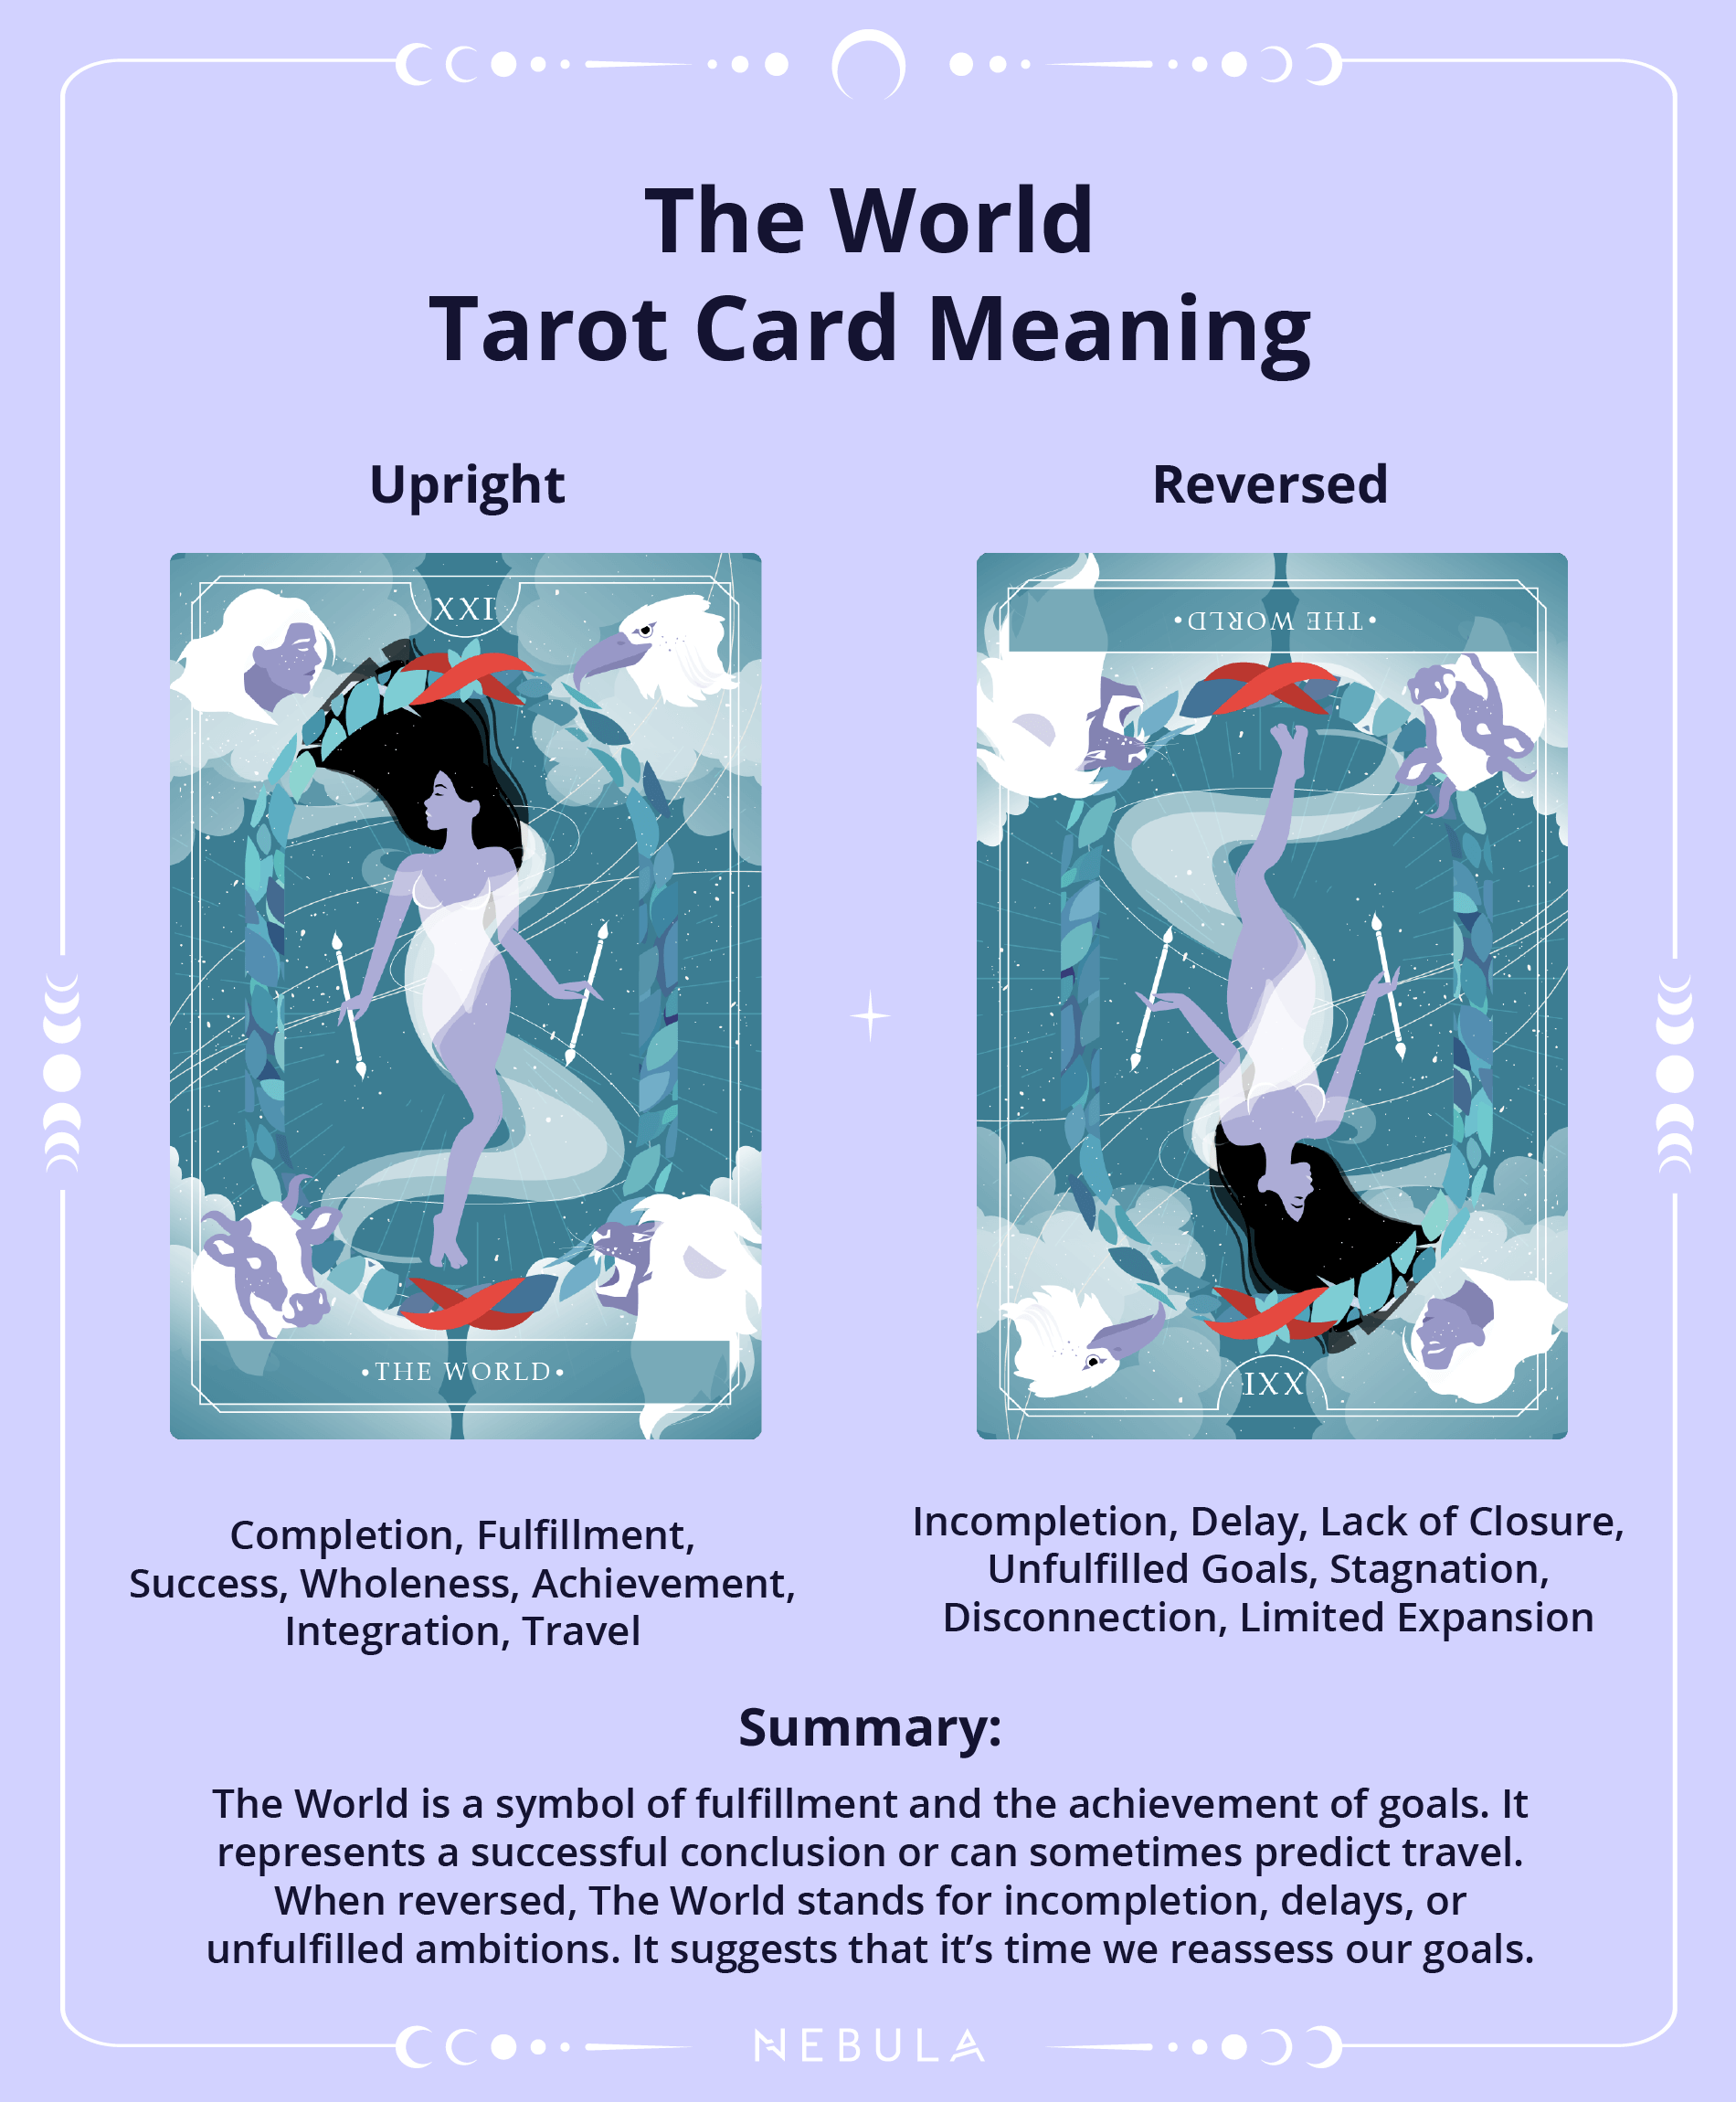 The World Tarot Card Meaning